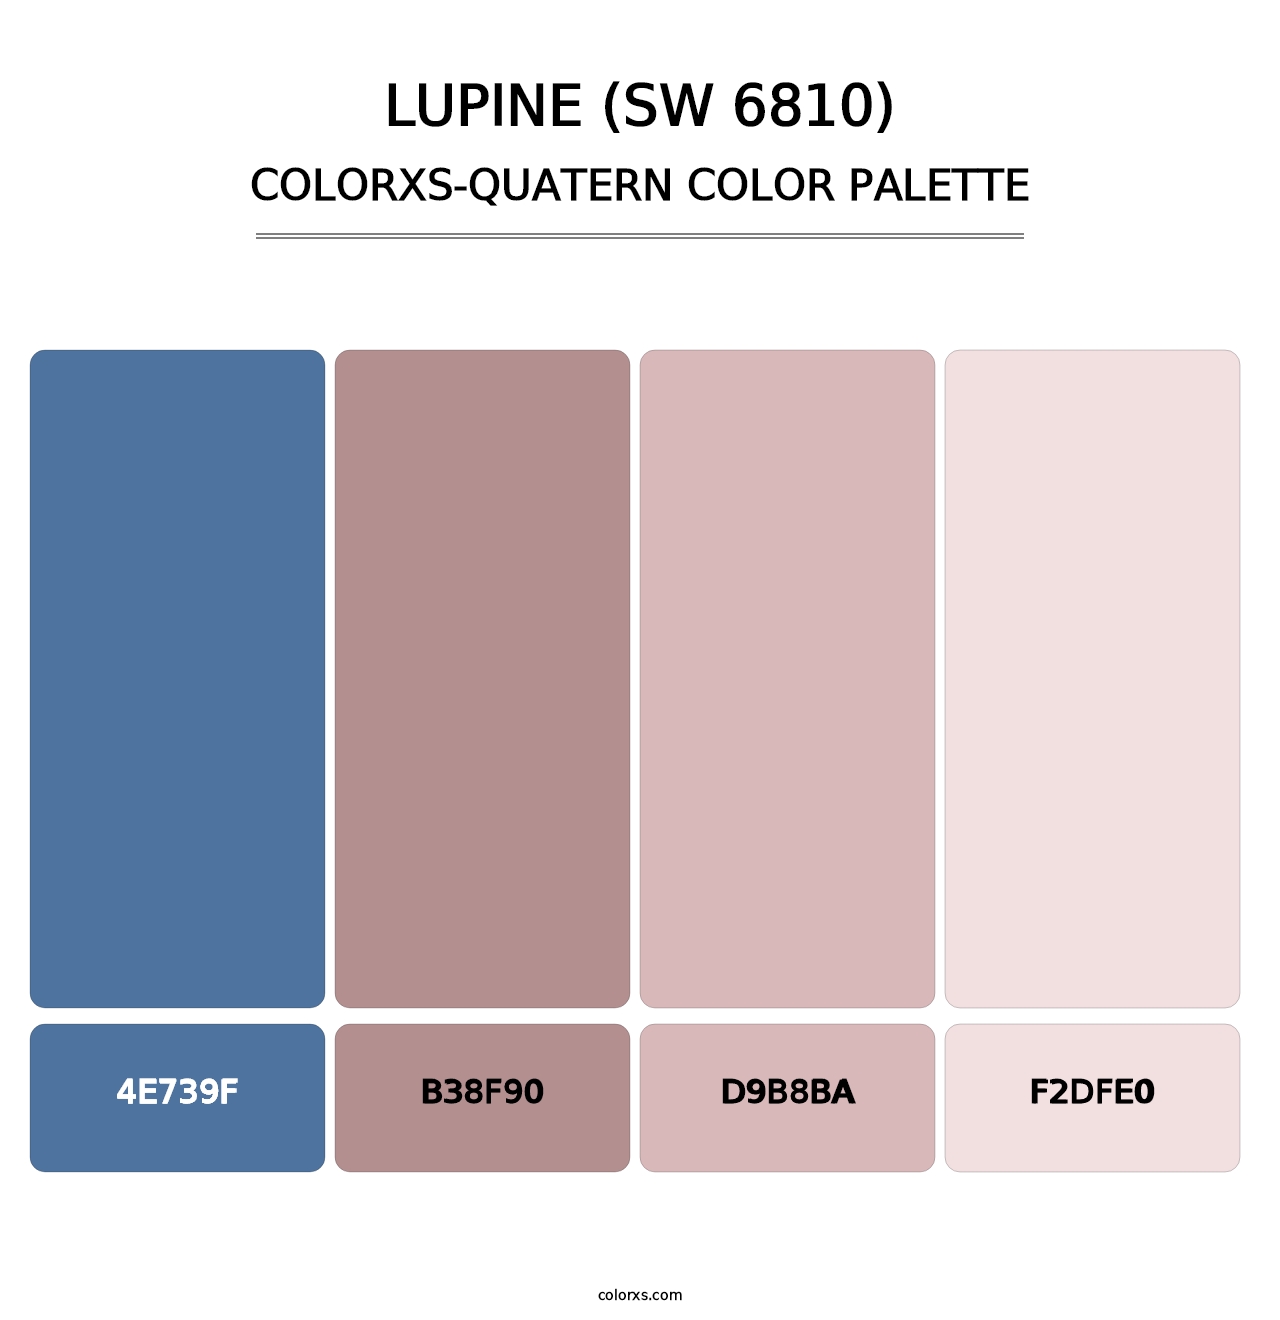 Lupine (SW 6810) - Colorxs Quatern Palette